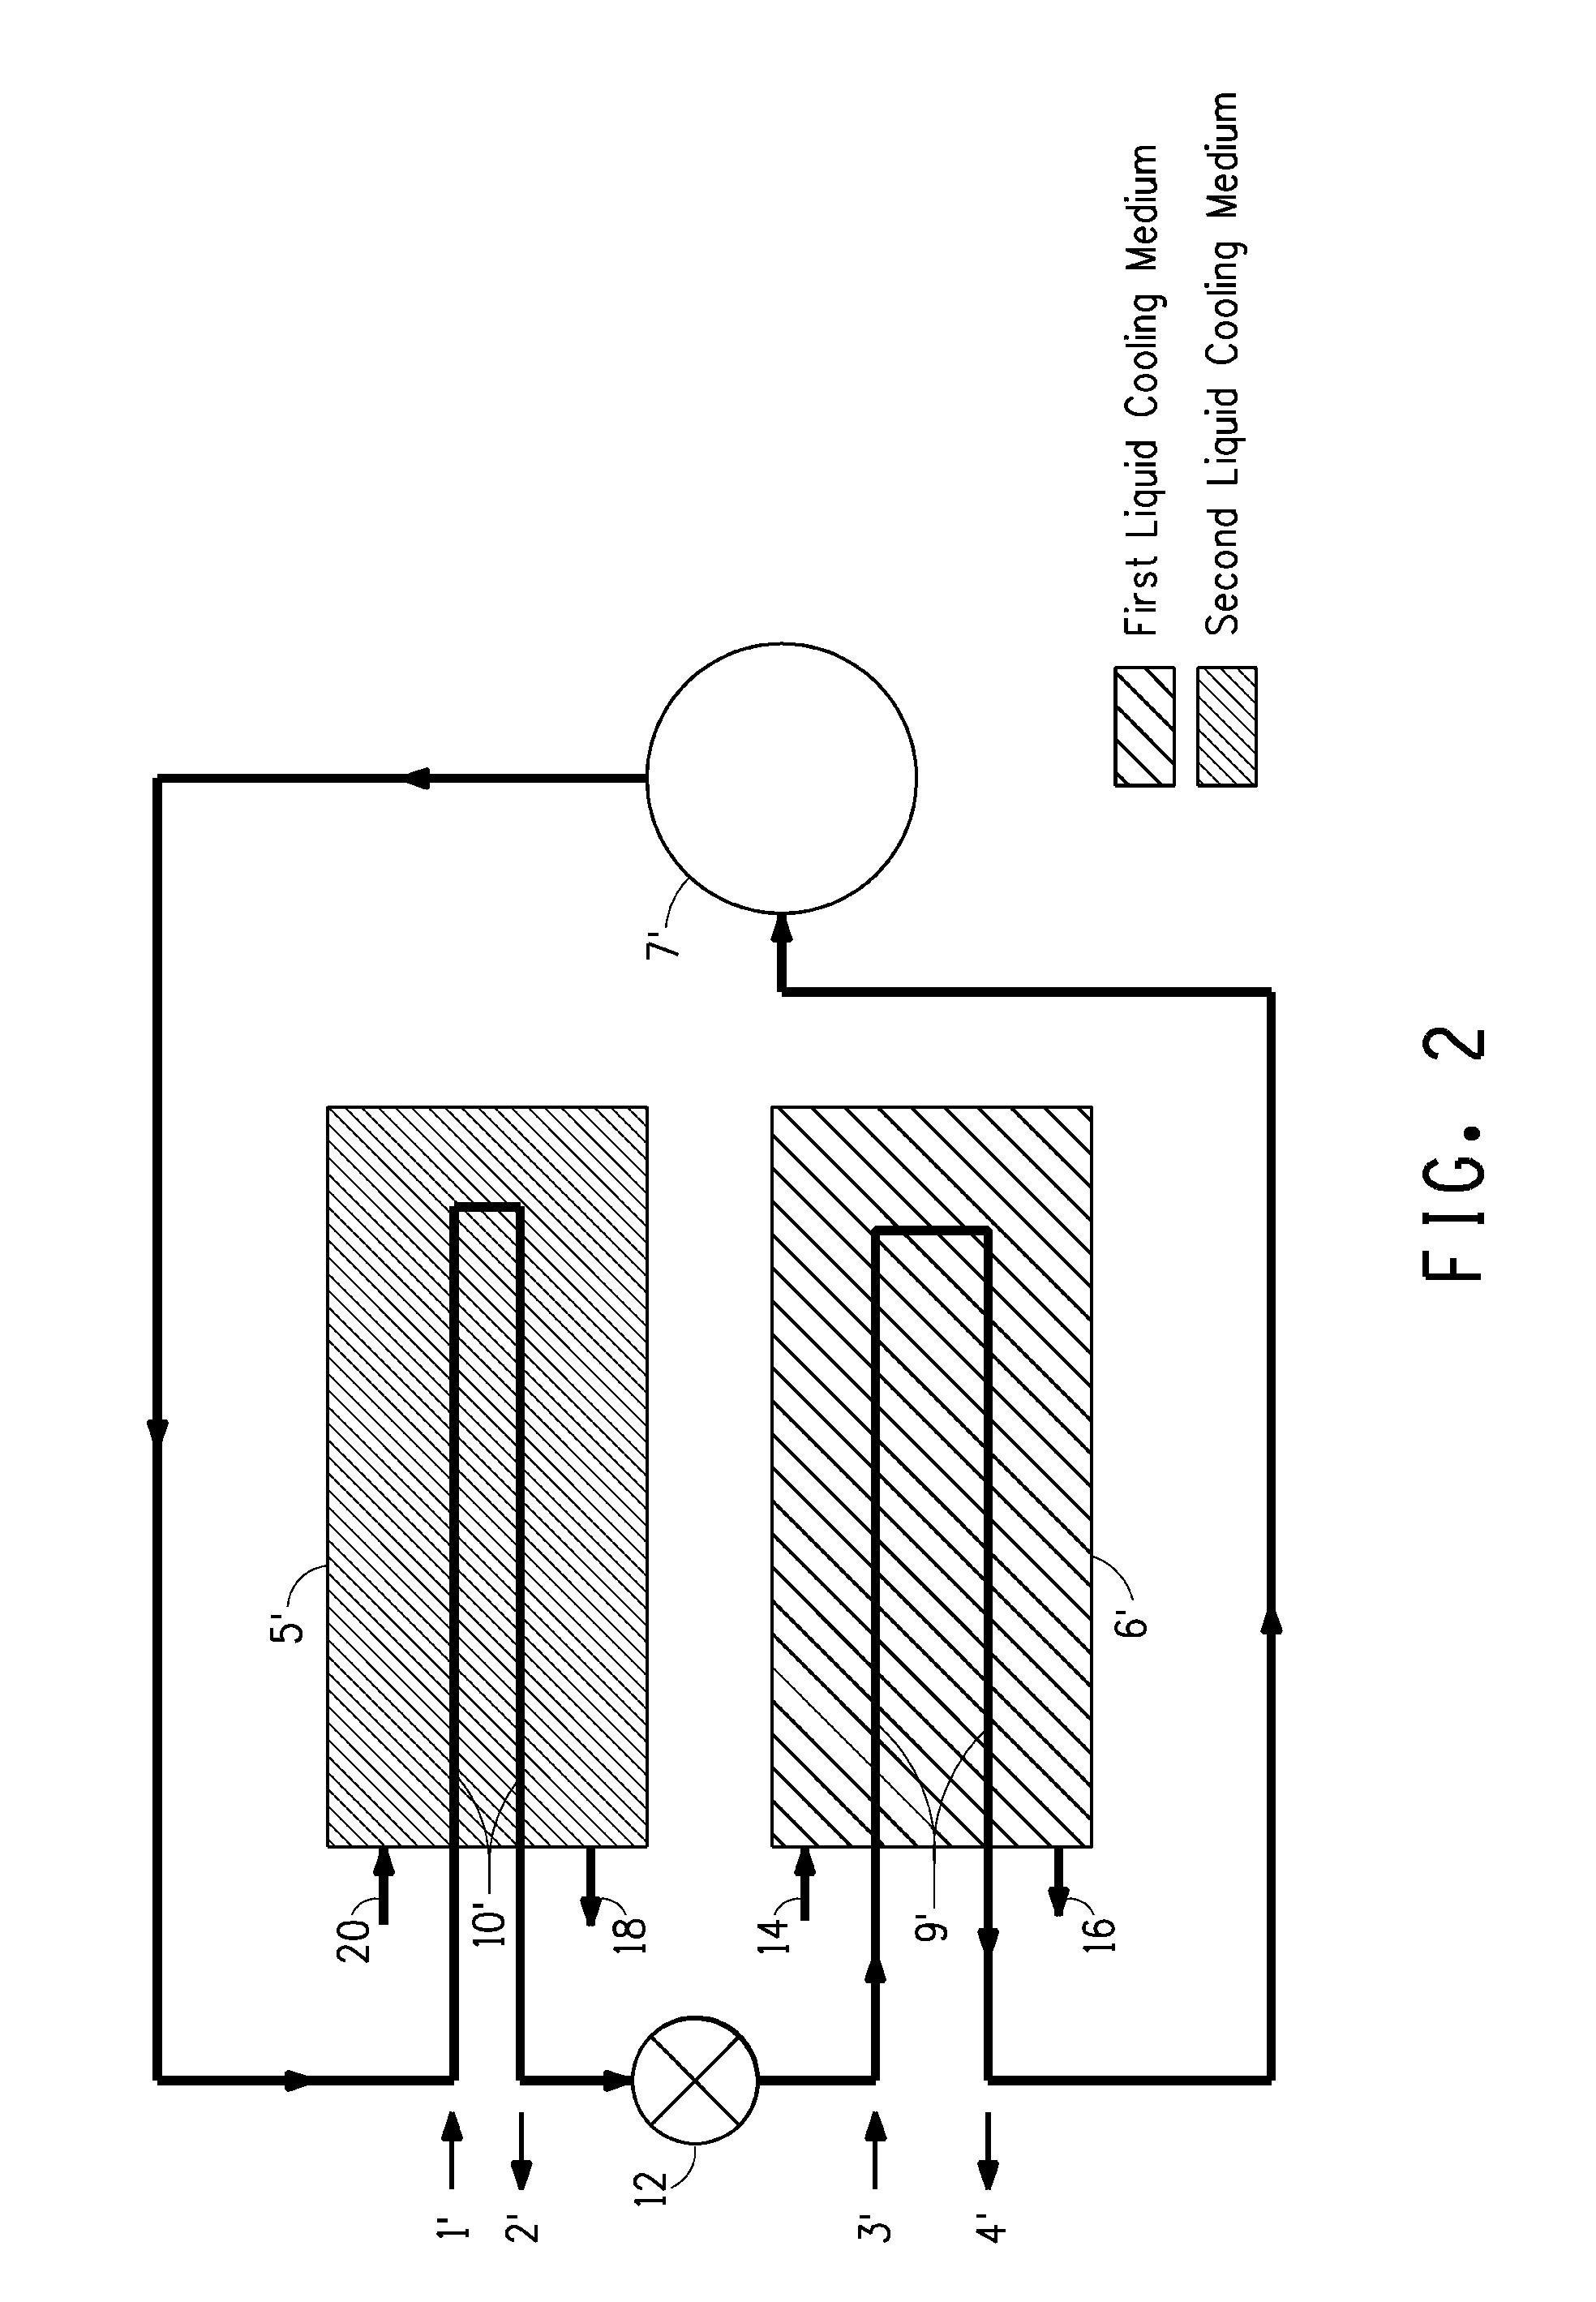 Chiller apparatus containing trans-1,1,1,4,4,4-hexafluoro-2-butene and methods of producing cooling therein